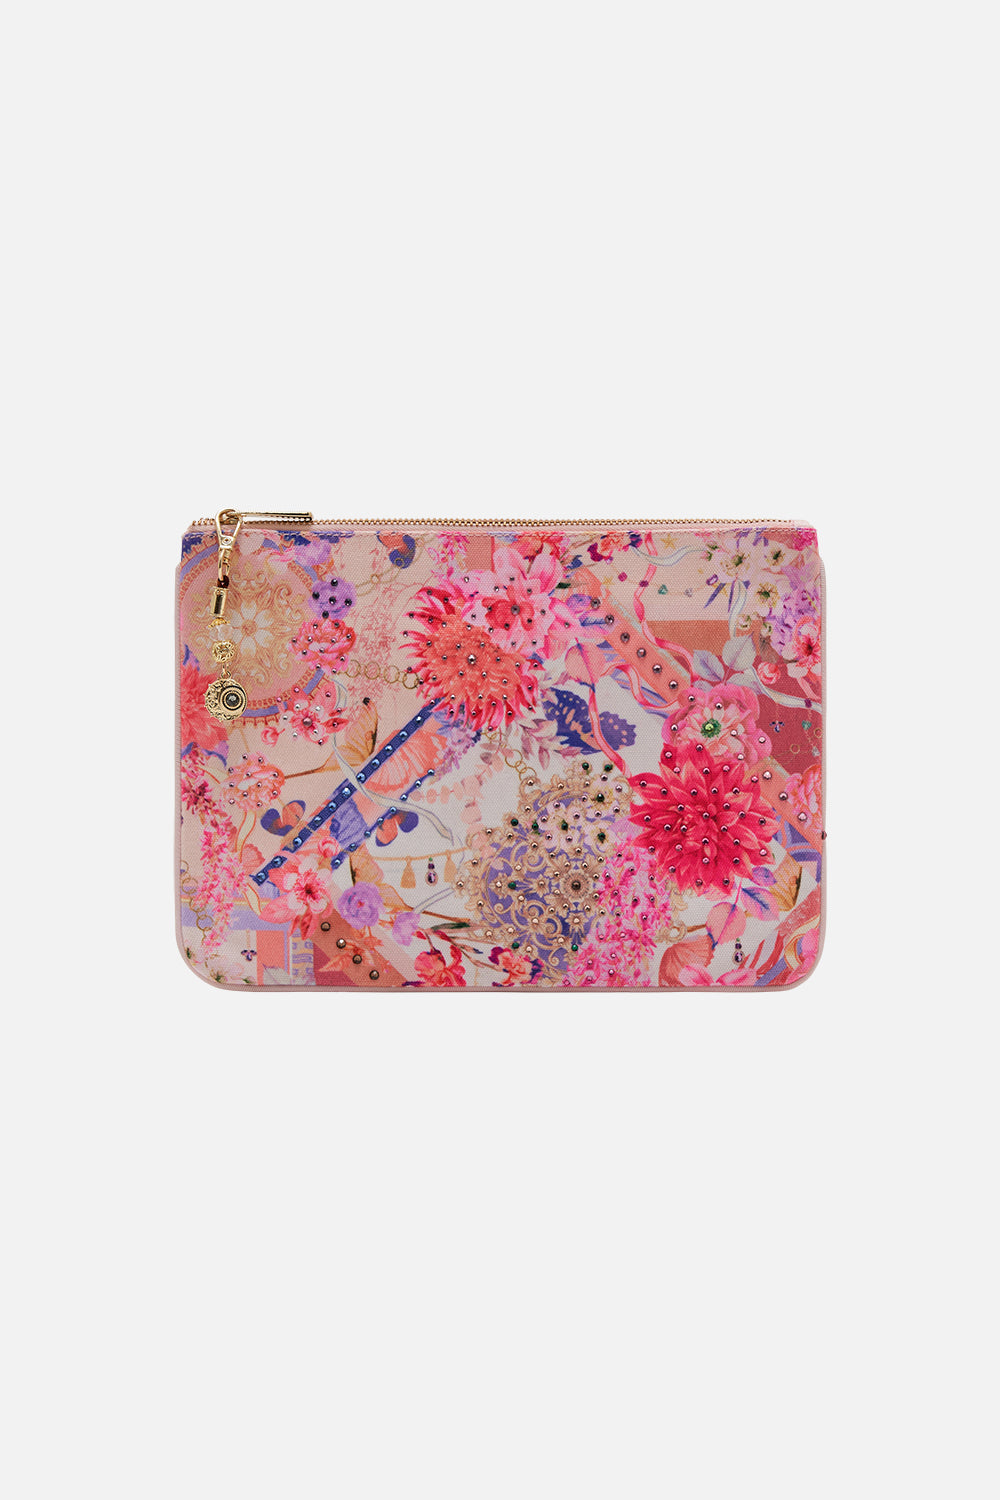 Small Canvas Clutch Rose Bed Rendezvous print by CAMILLA